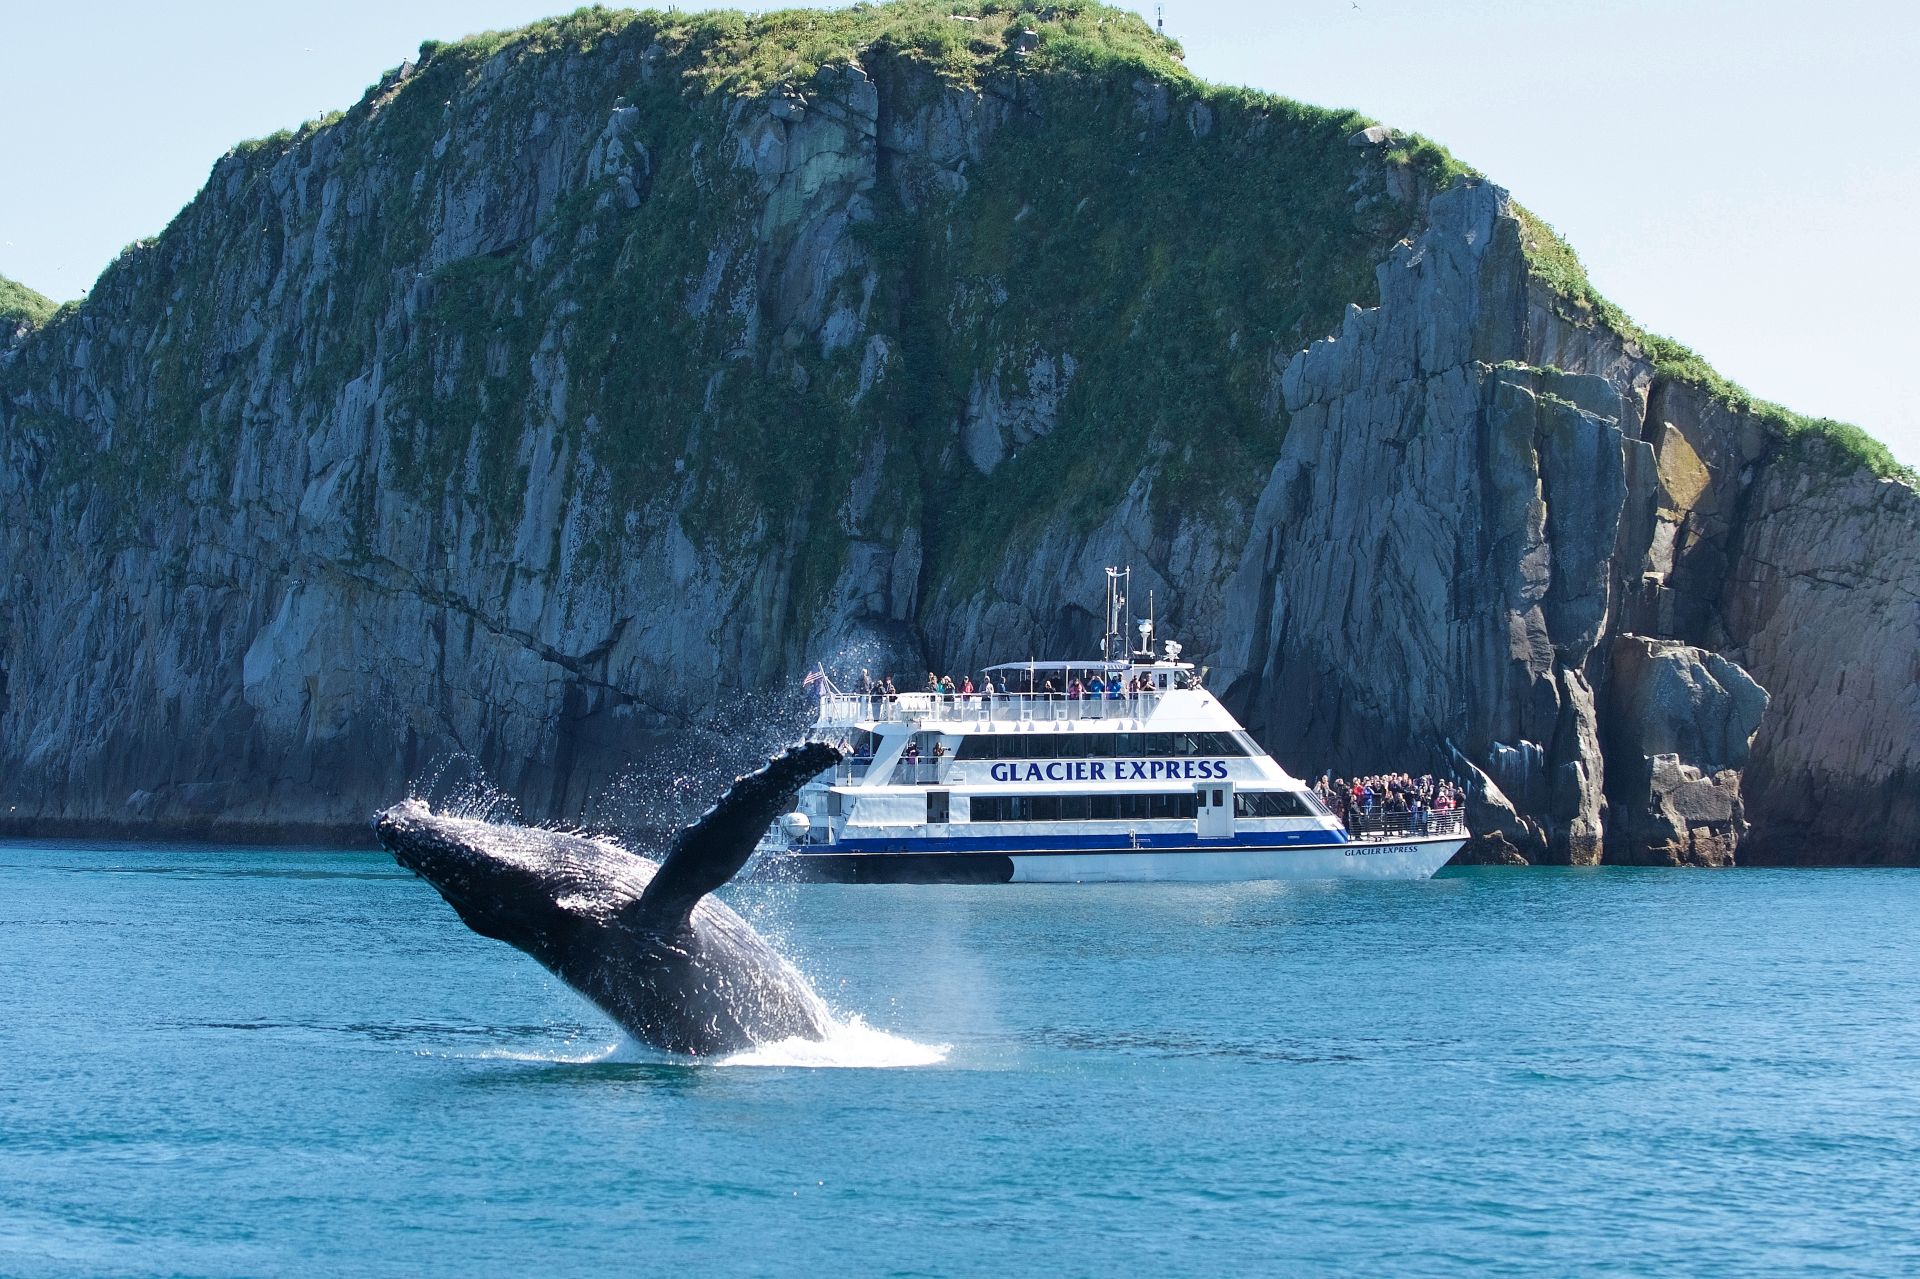 Humpback Whale Breaching in front of the Glacier Express catamaran